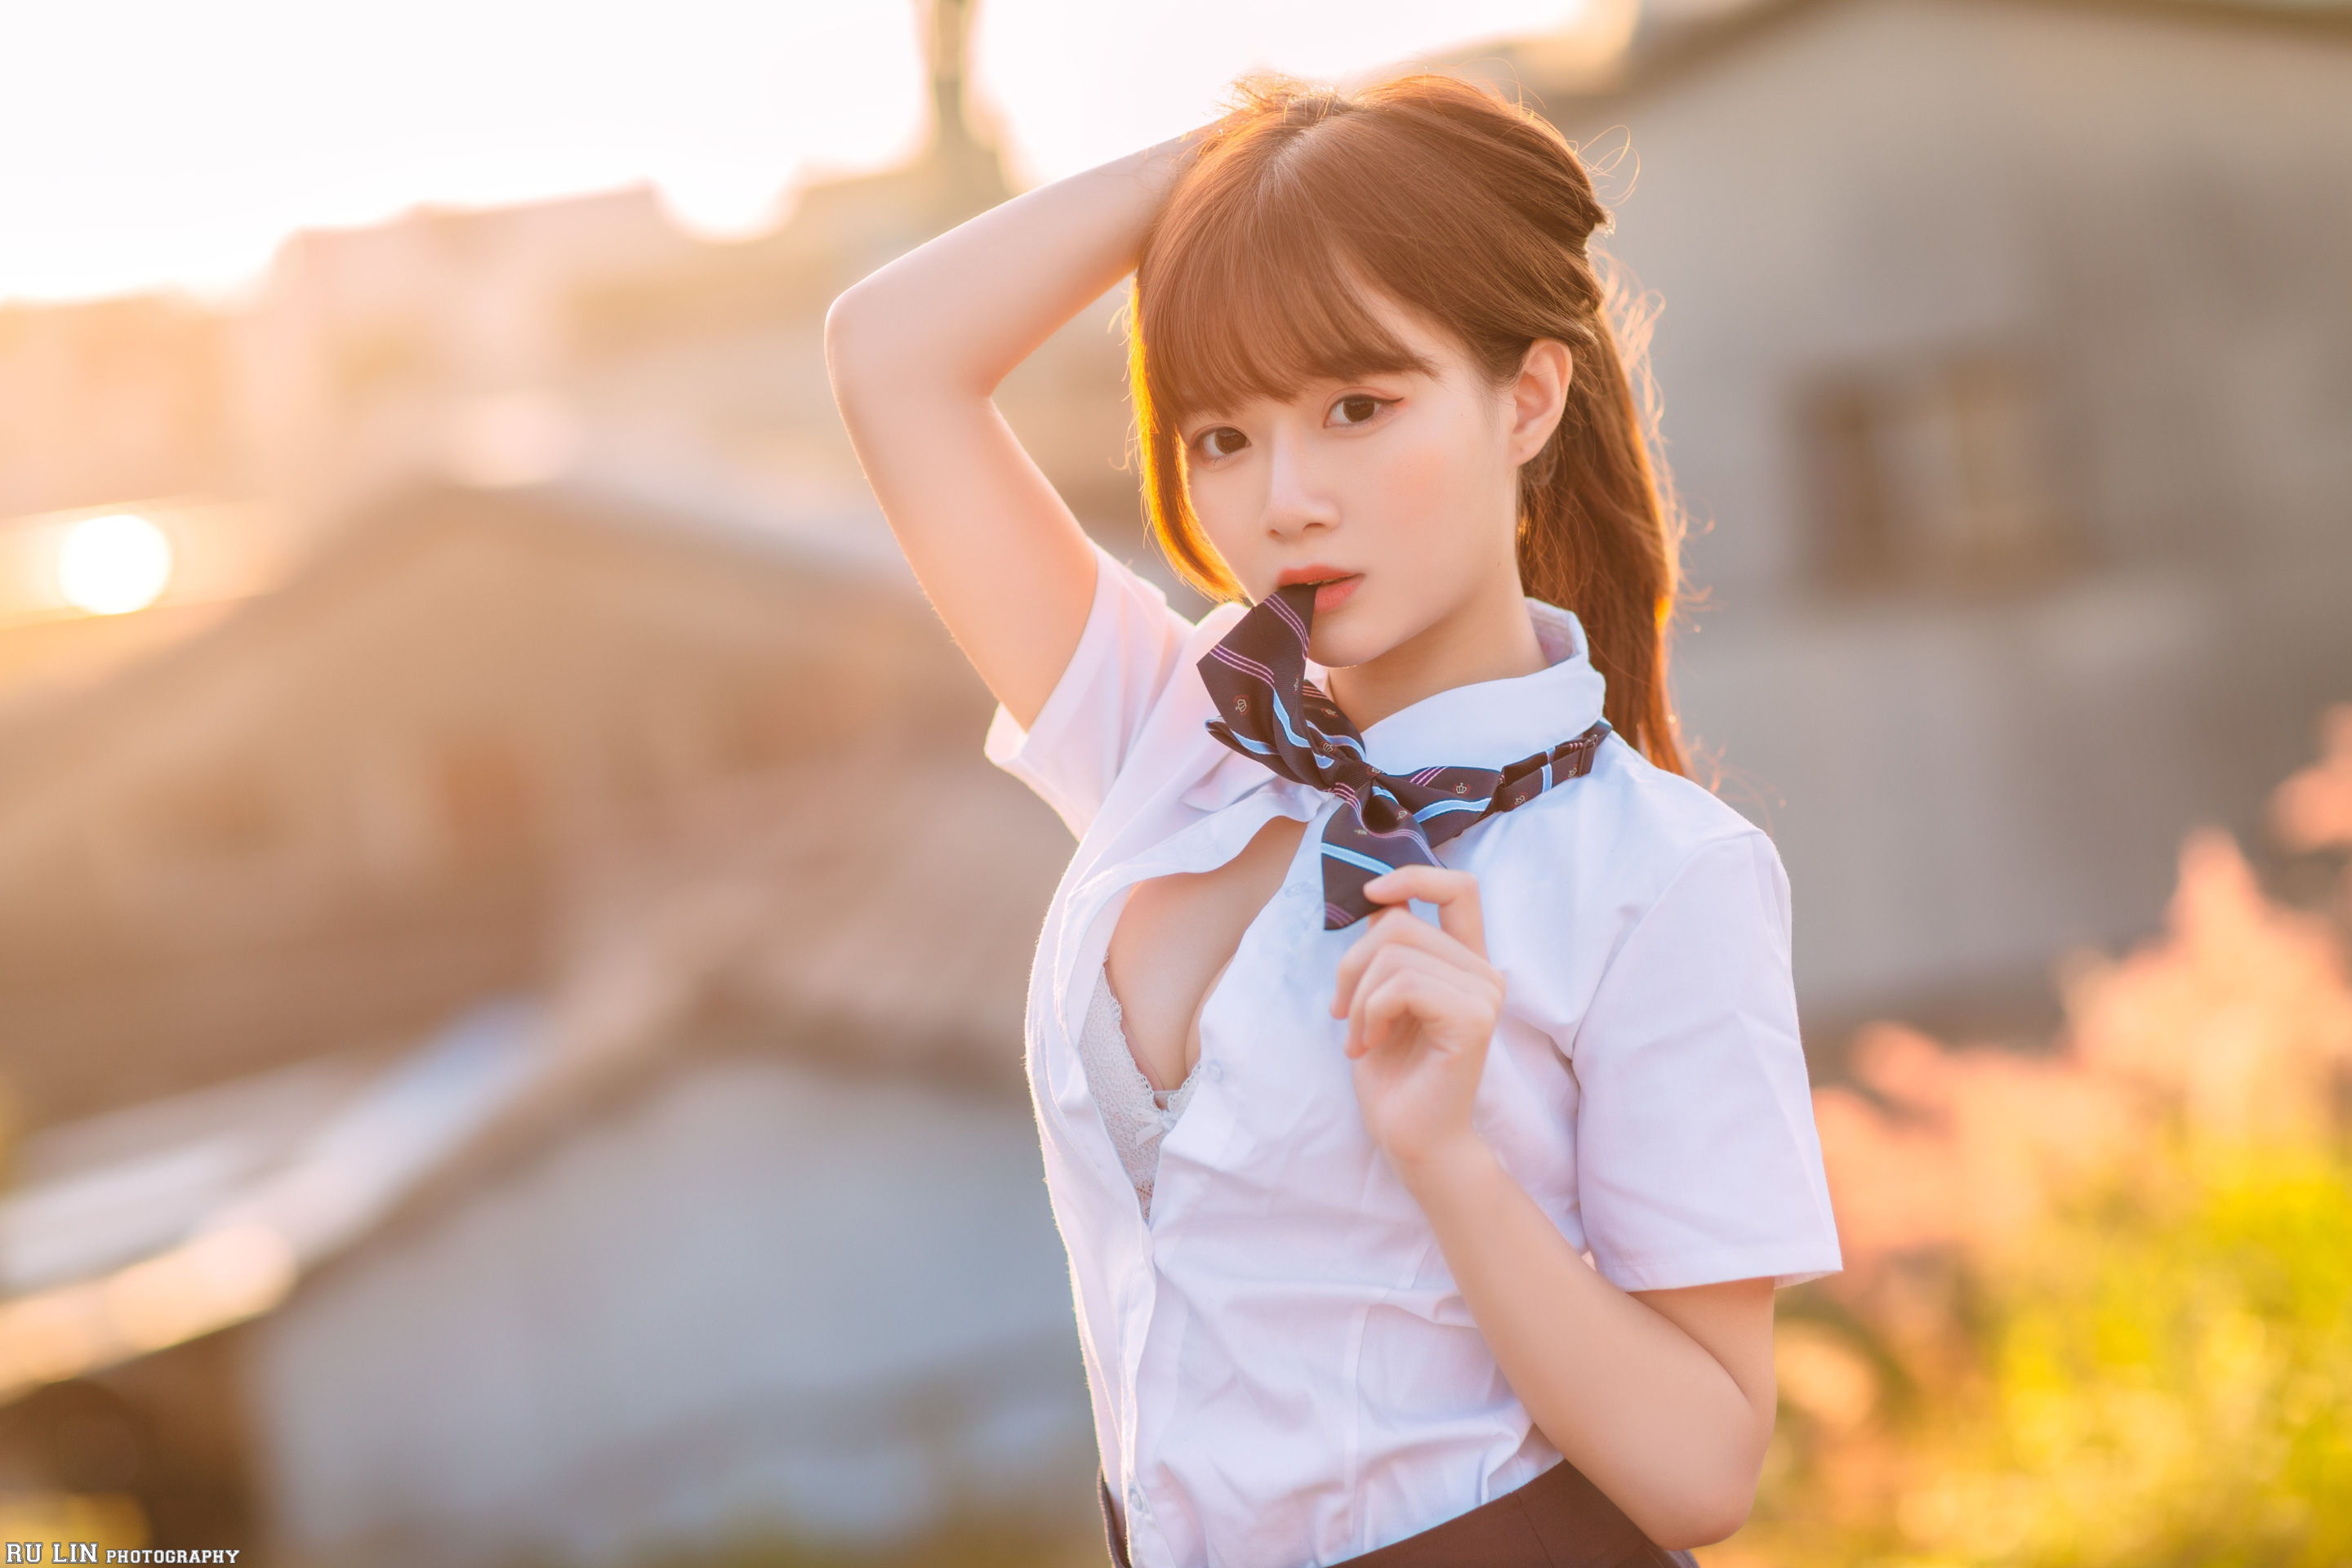 People 2880x1920 Asian school uniform depth of field brunette one arm up white skirt unbuttoned cleavage white bra biting clothes women outdoors outdoors schoolgirl bow tie blurred blurry background model looking at viewer sunset sunset glow open shirt building bra house bangs short sleeves standing women